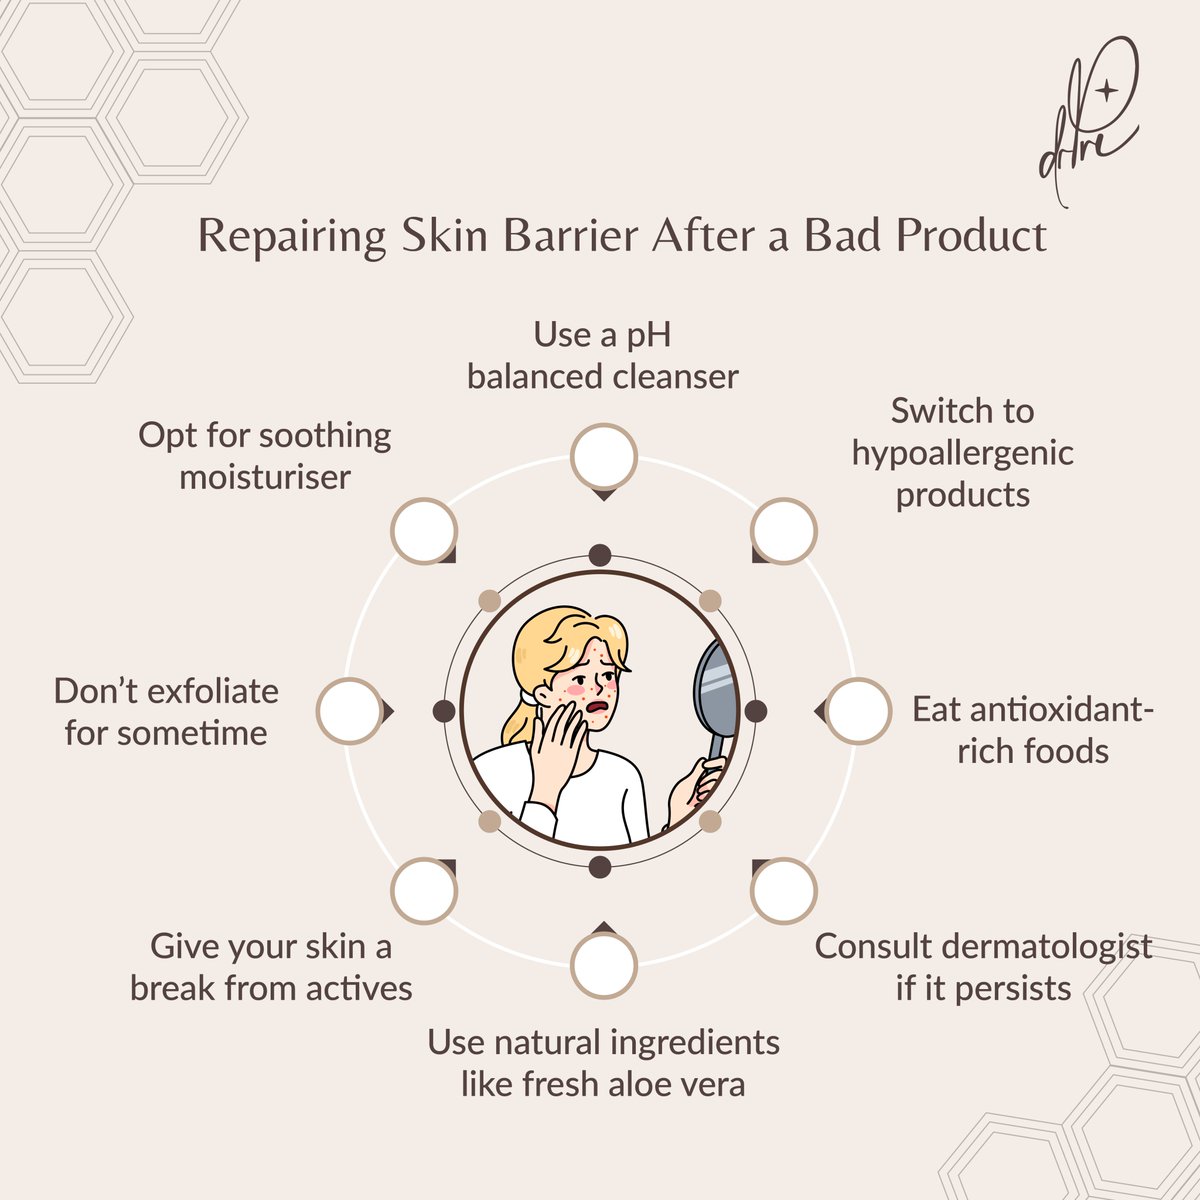 Switch before it's too late! ⏰
.
.
For queries contact,
✉️ info@dnaskinclinic.in
📞 7338010101

#skinproduct #skinbarrier #skincare